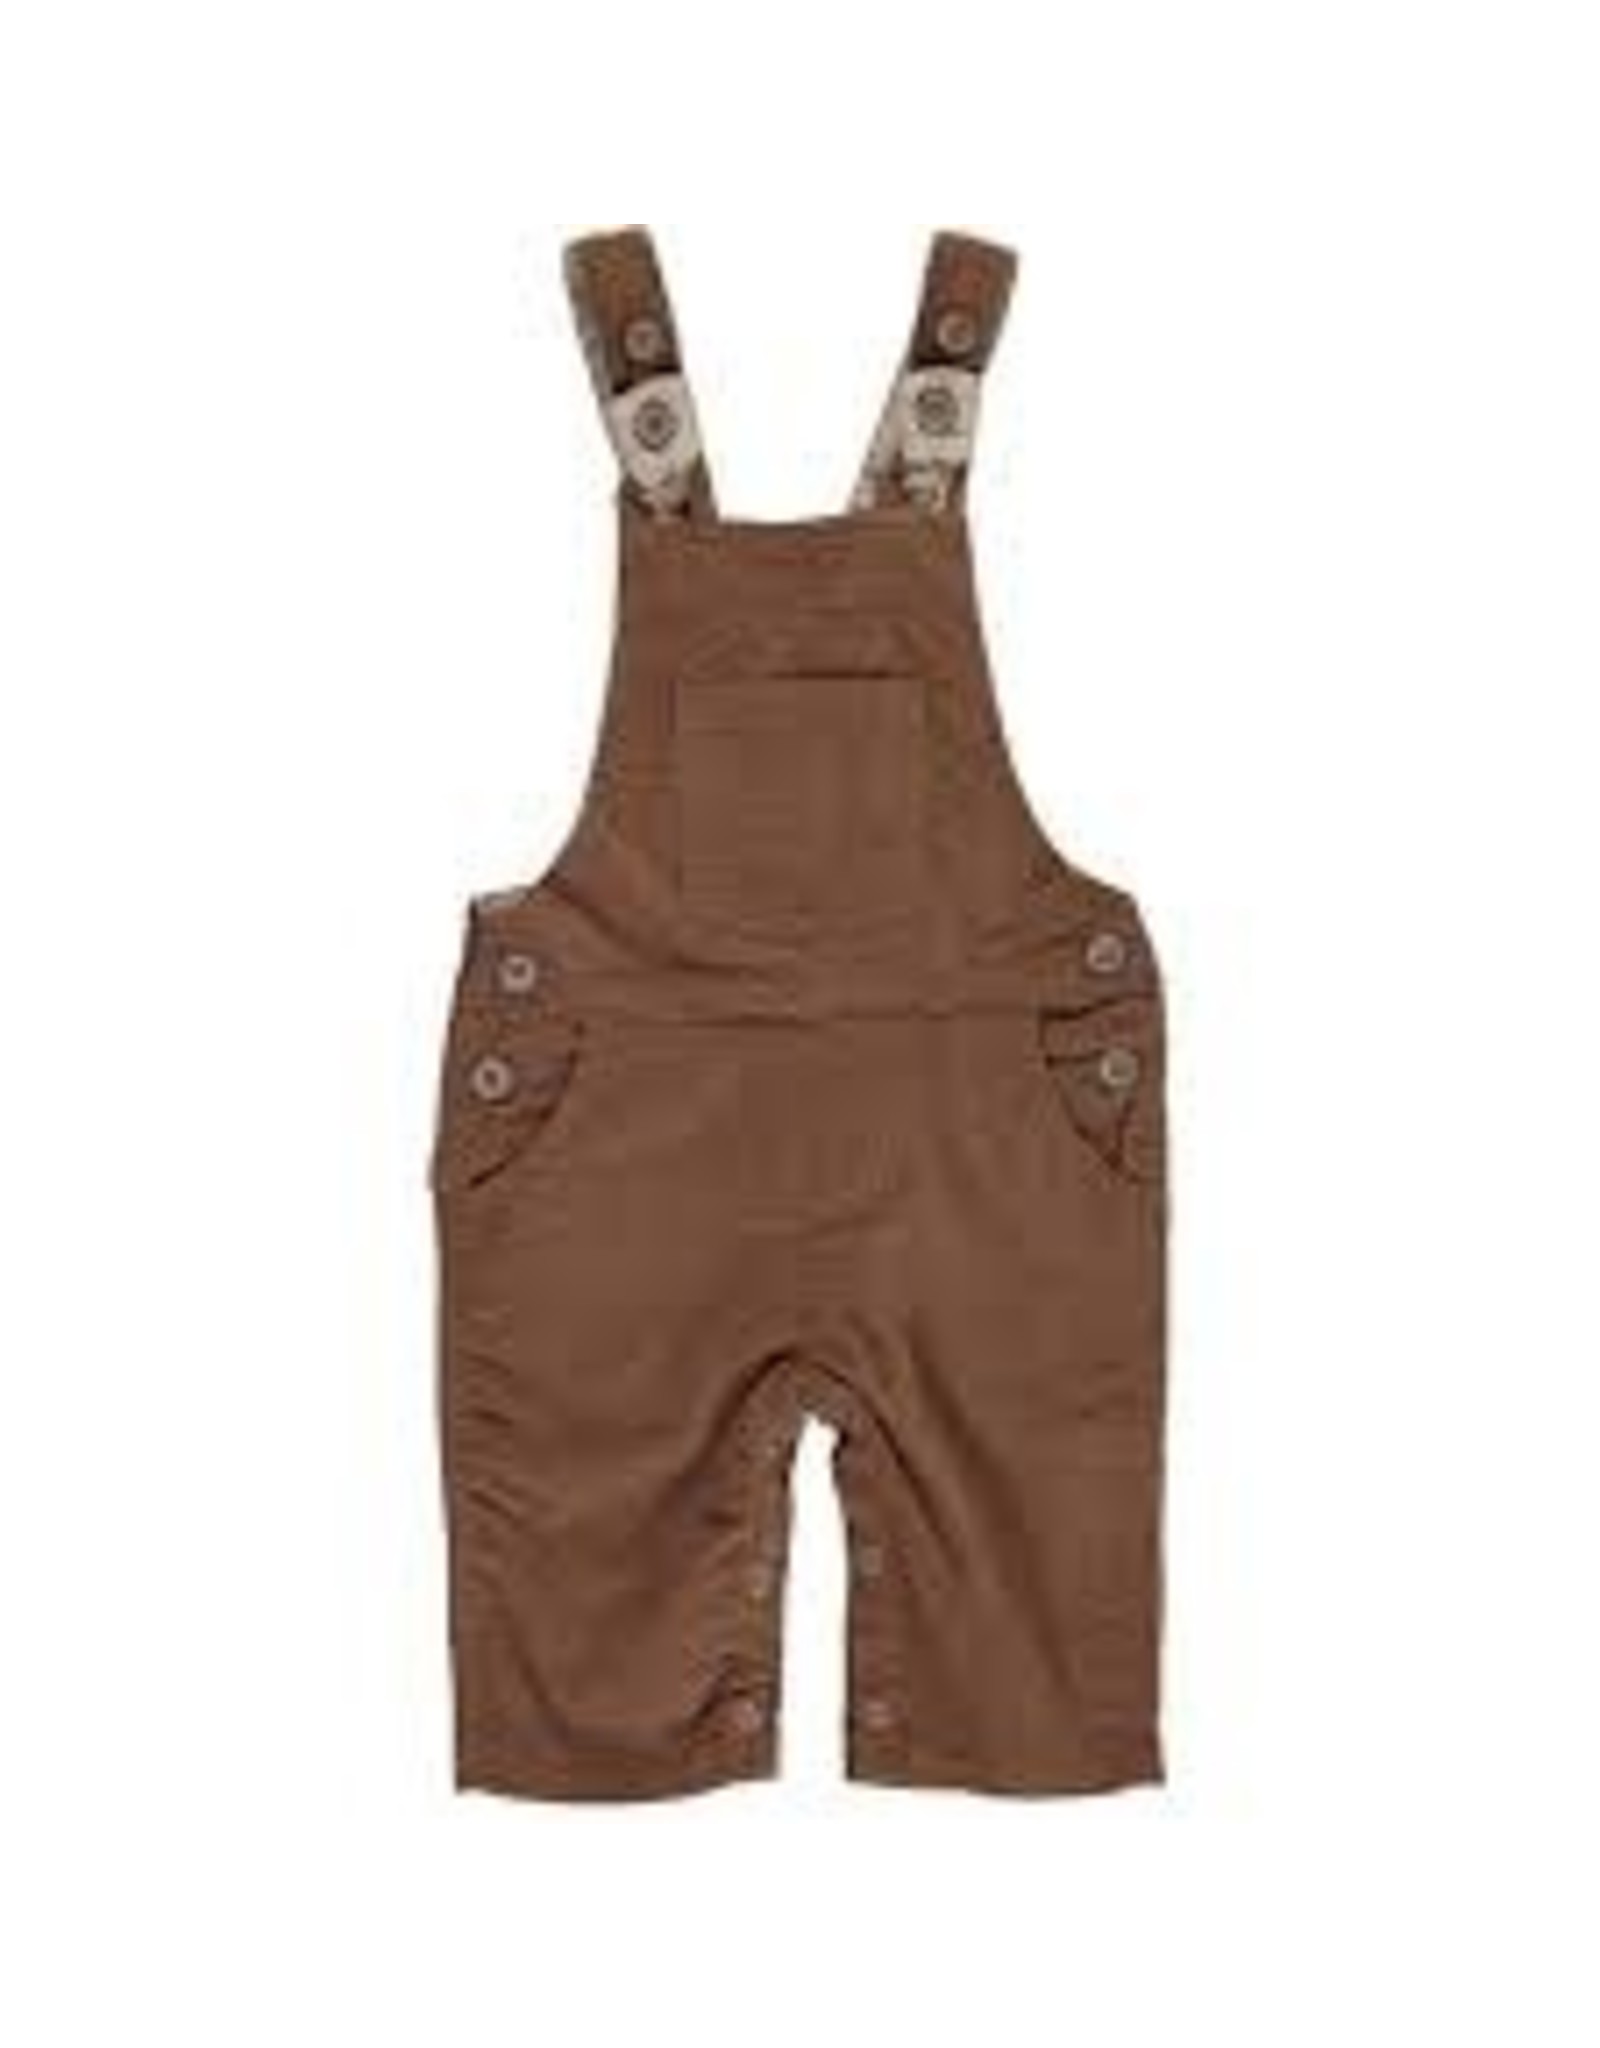 Me & Henry Harrison Cord Overall - Brown